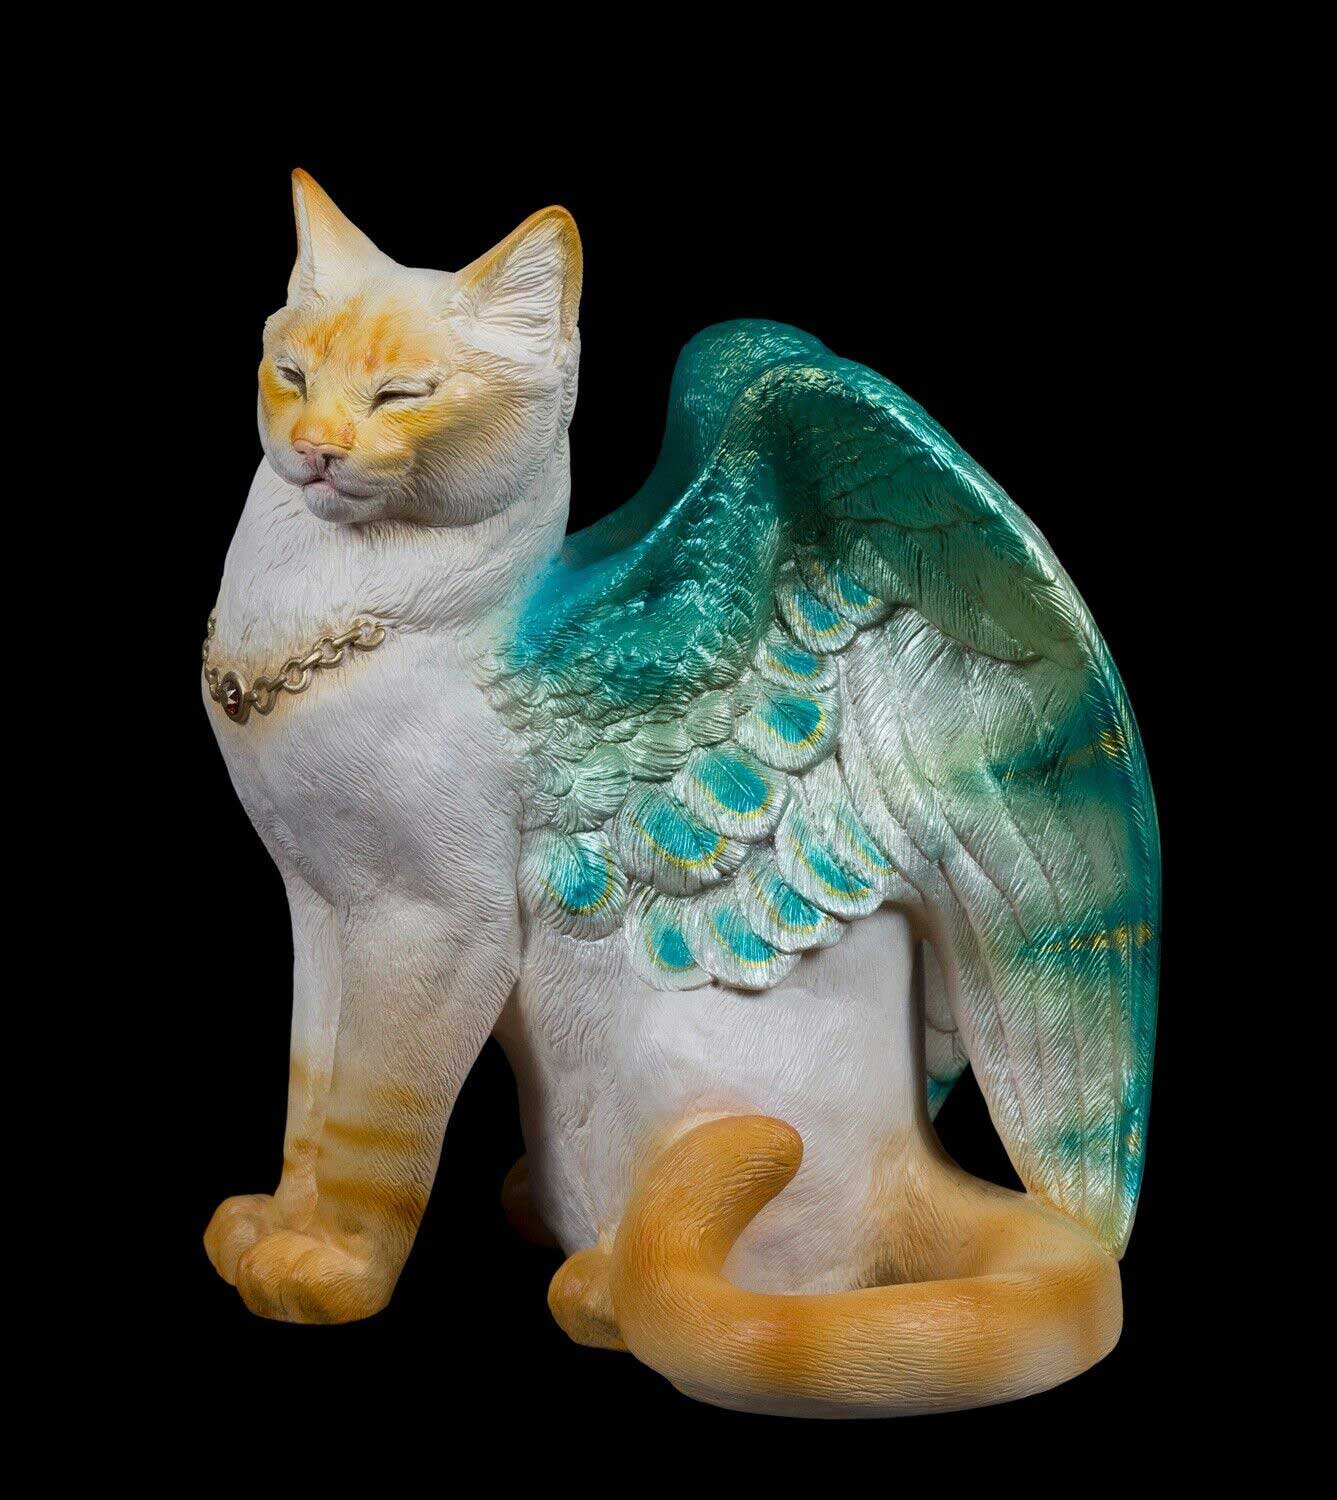 20230405-Seaglass-Eyes-Shut-Large-Bird-Winged-Flap-Cat-Test-Paint-1-by-Gina